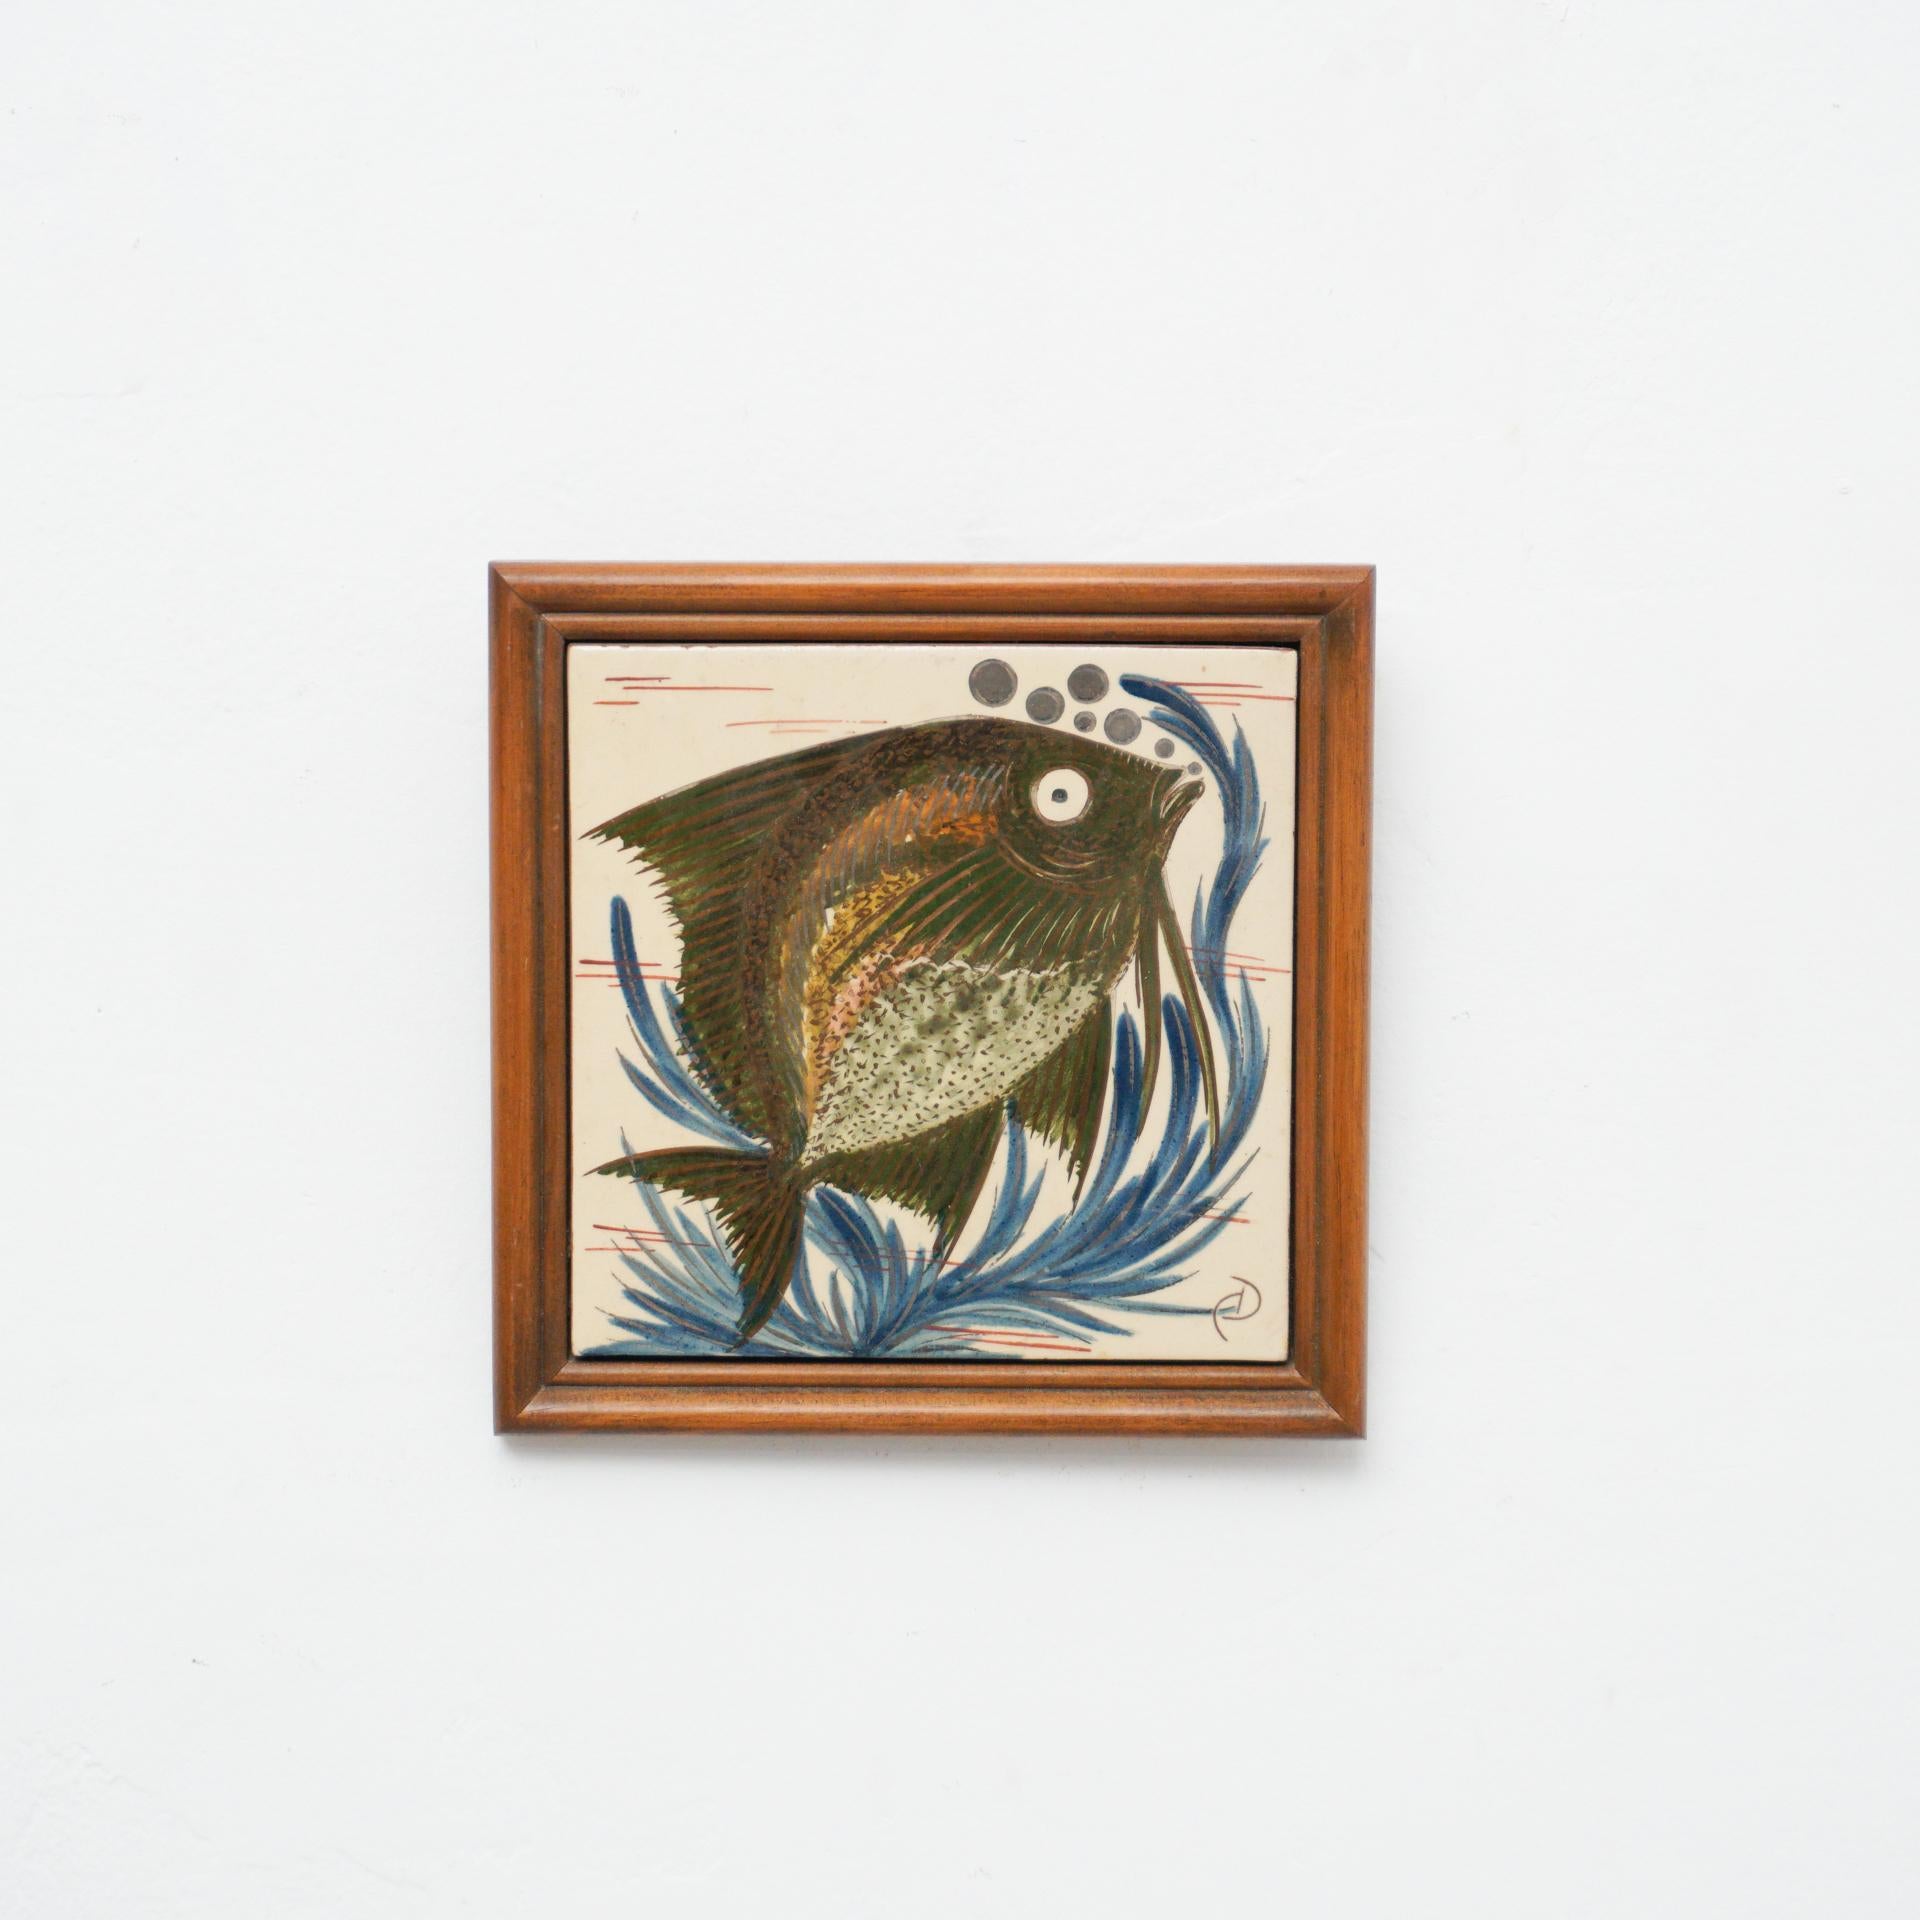 Ceramic Hand Painted Artwork of a fish by Catalan artist Diaz Costa, circa 1960.
Framed.

In original condition, with minor wear consistent of age and use, preserving a beautiul patina.